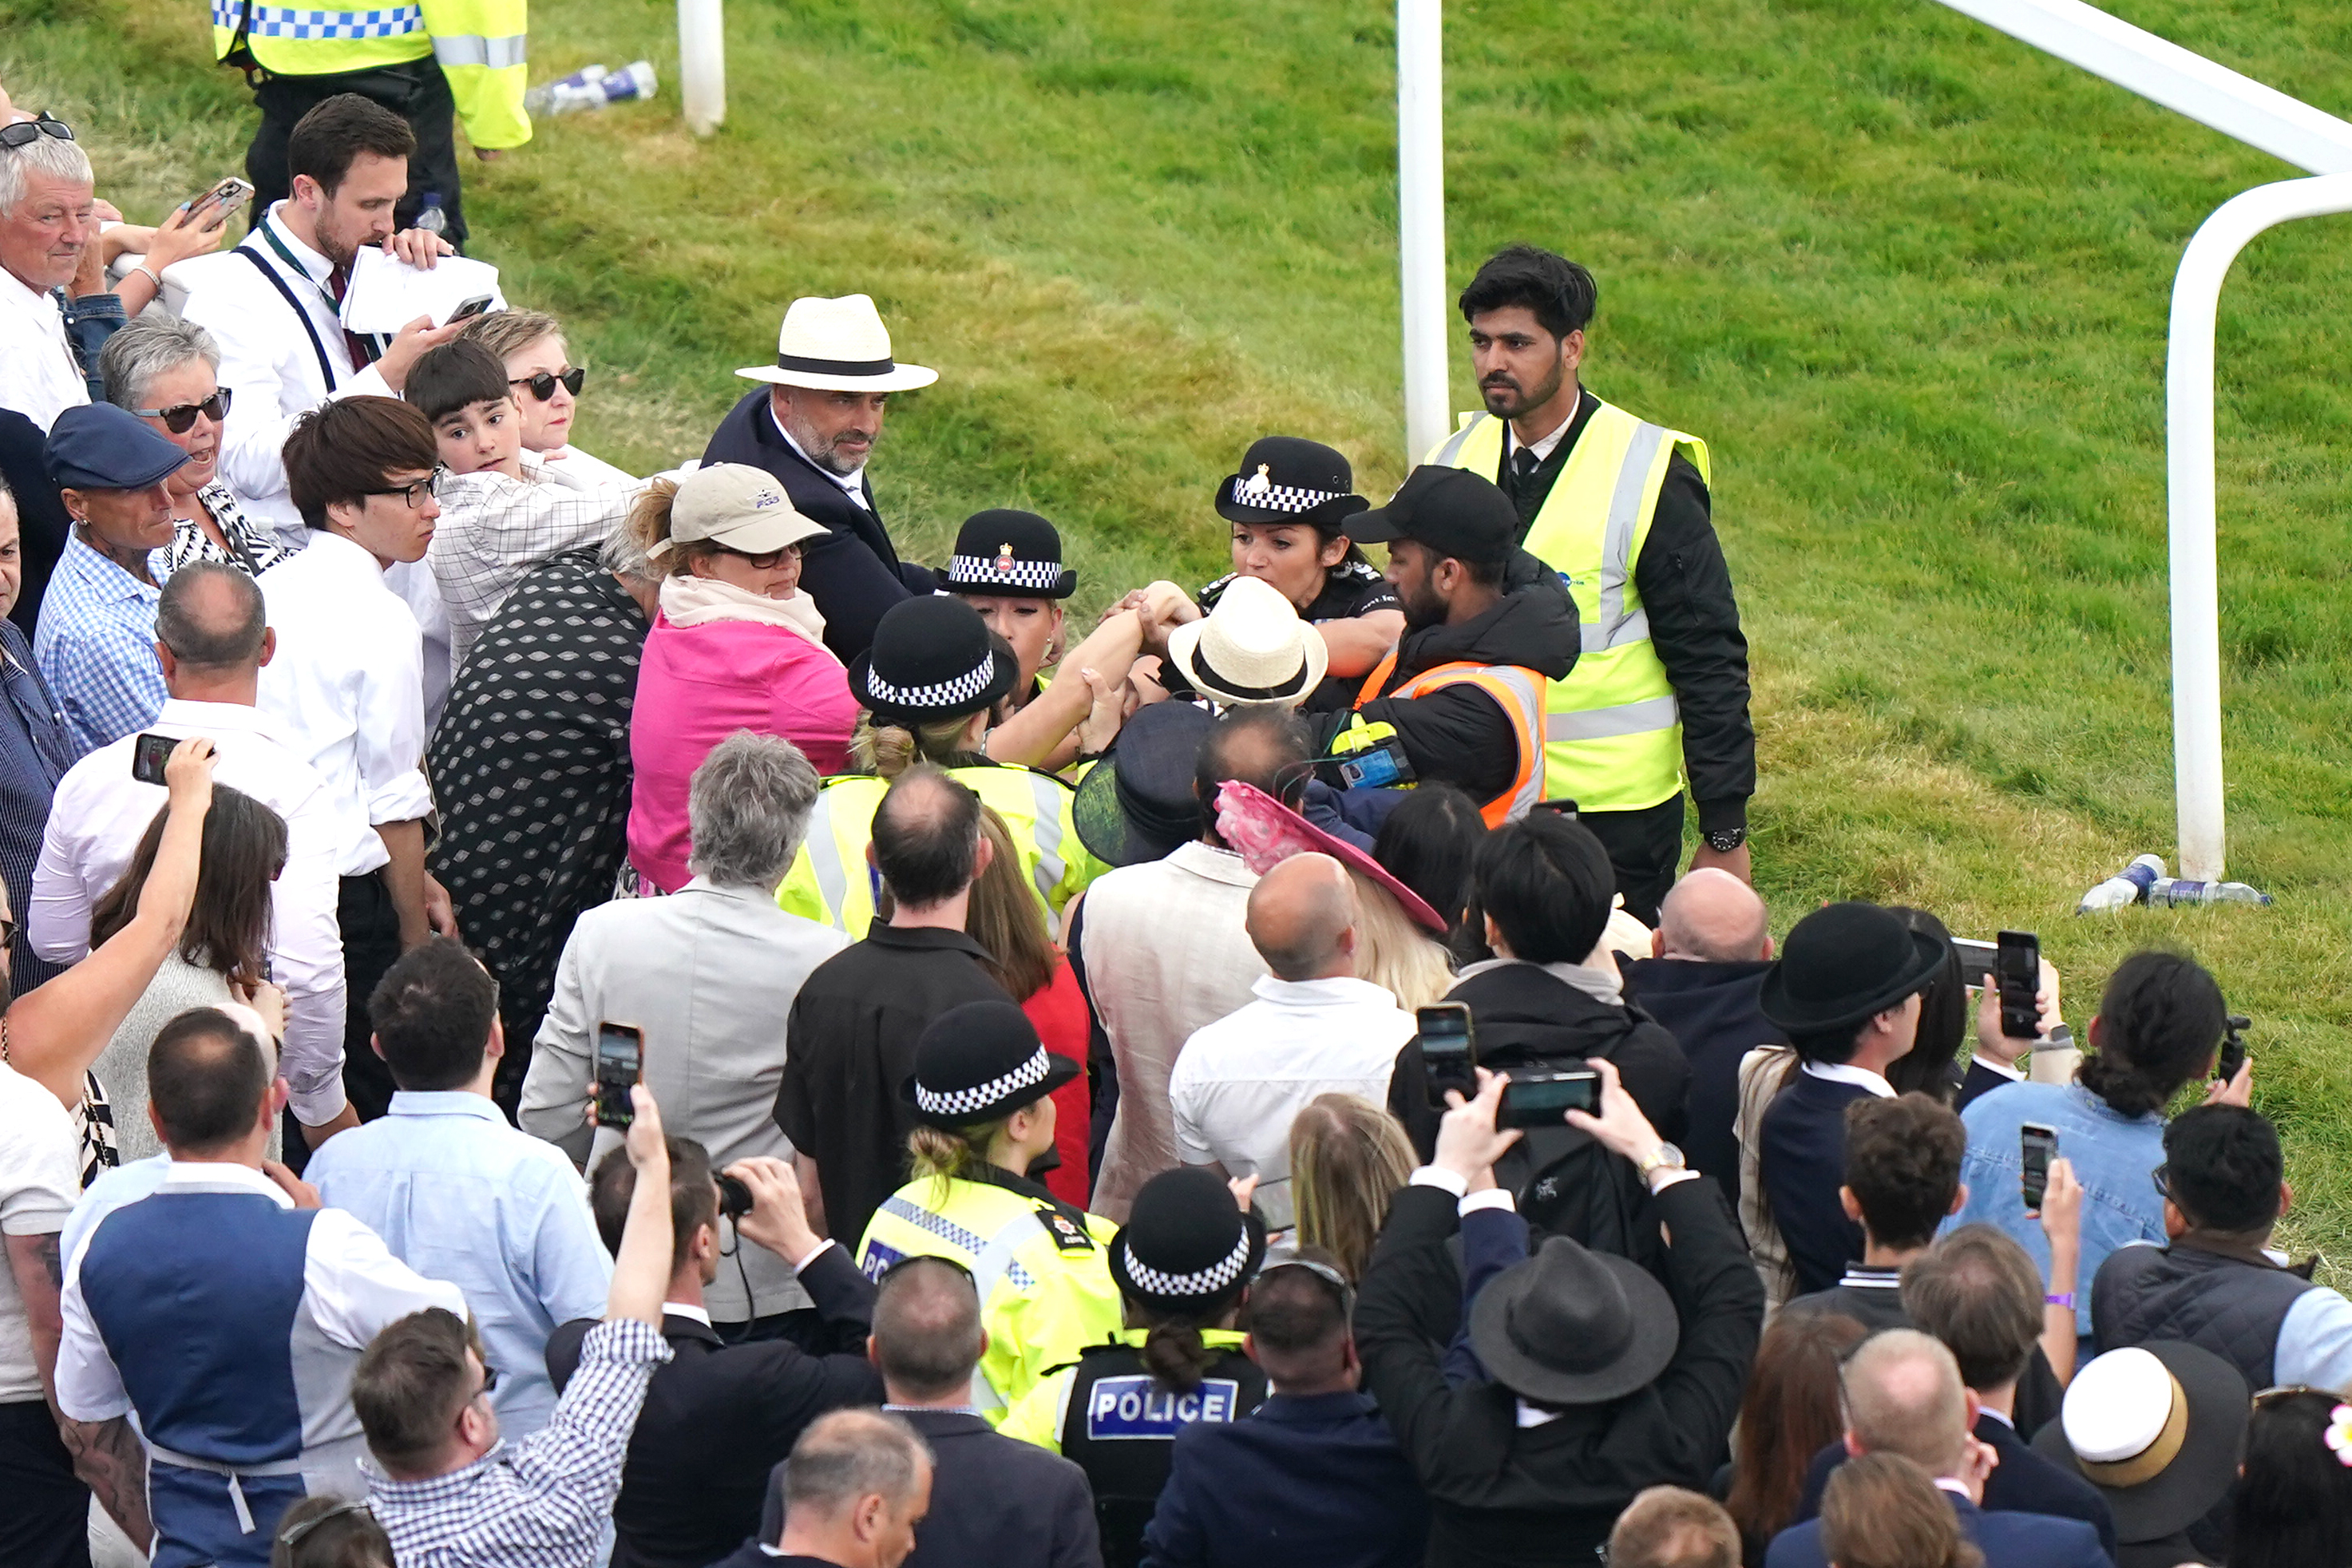 A spectator is detained by police in the crowd at Epsom